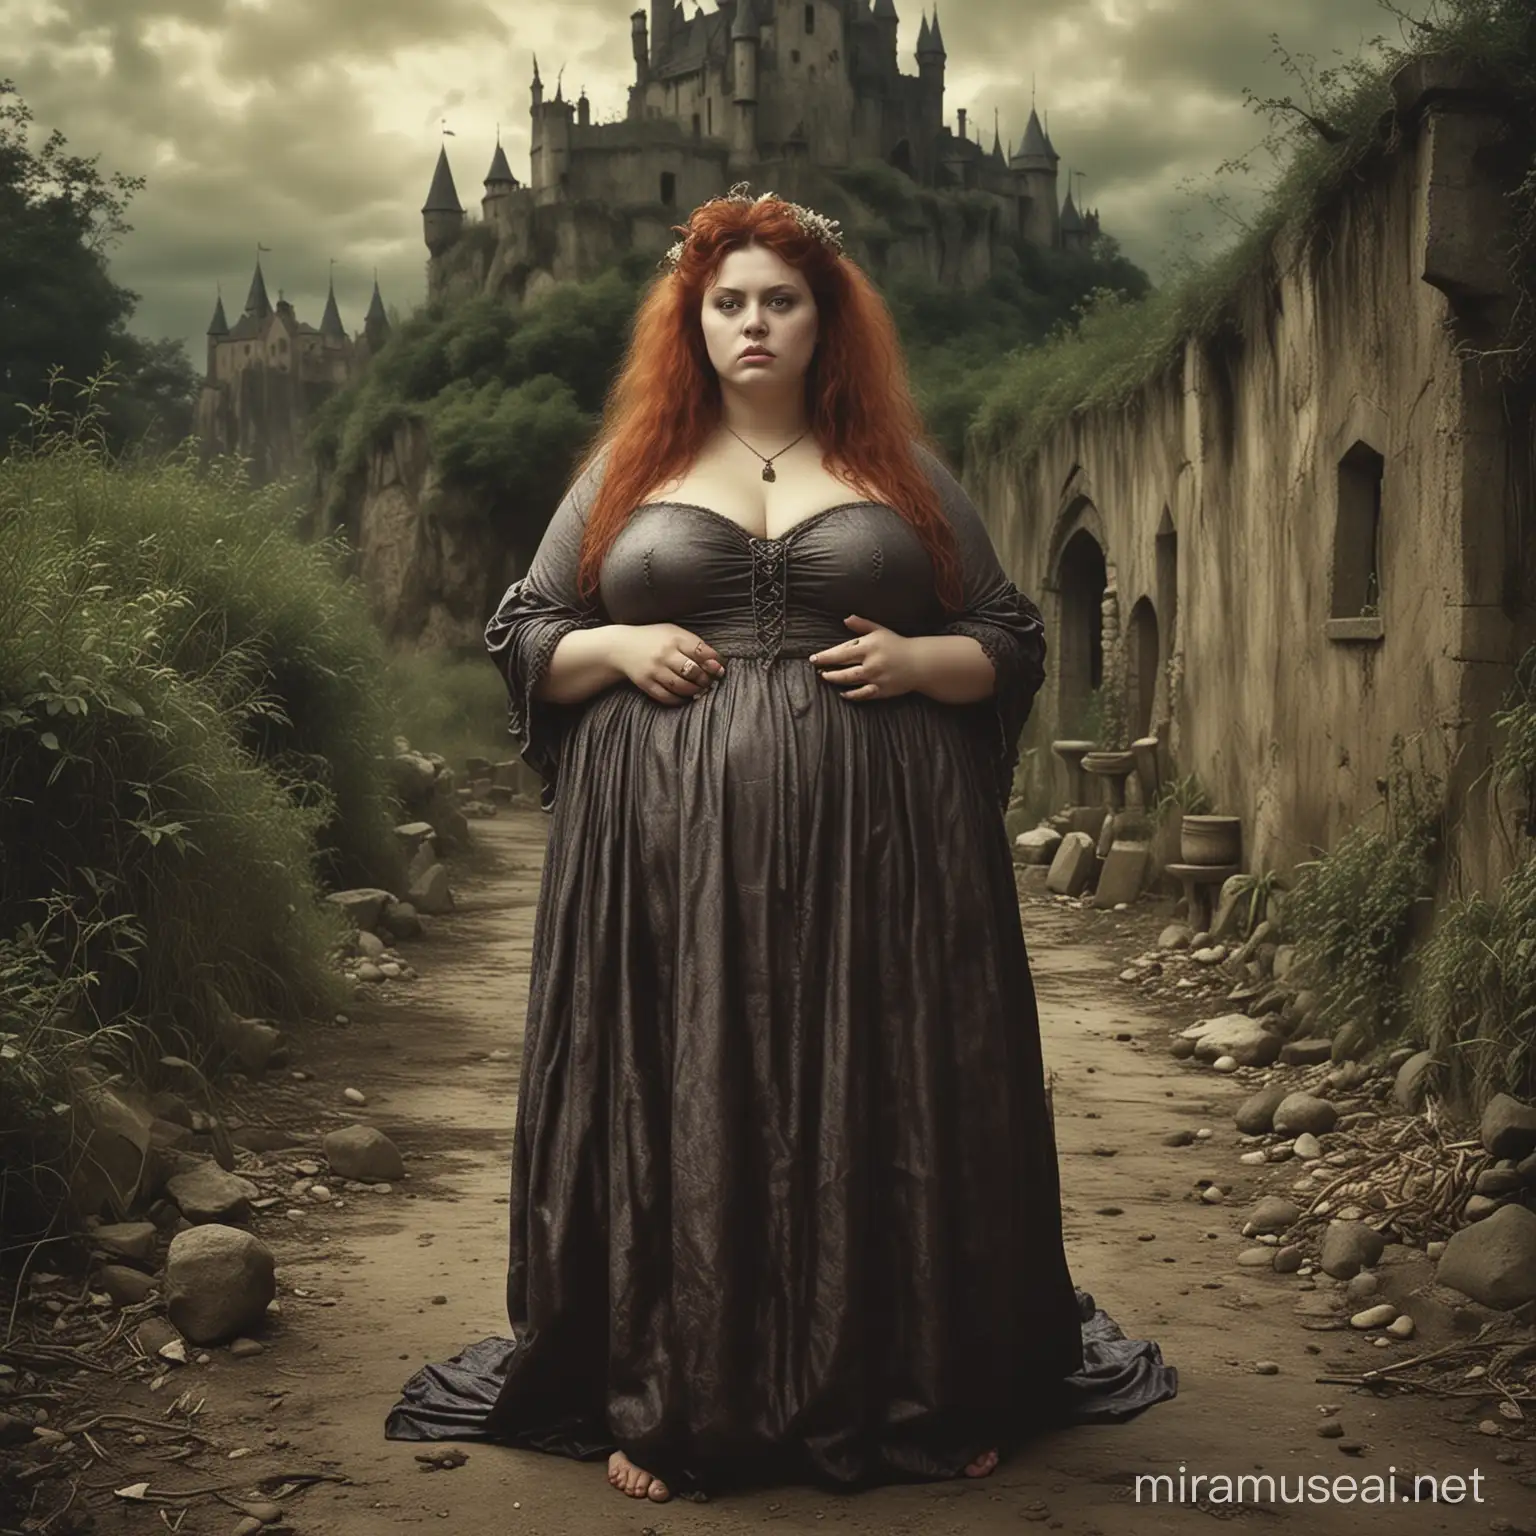 Jan Saudek depicting chubby  voluptous liberal Female Tim Burton  in tight medieval dress 
unveiling  a pagan cult in a mysterious island, thick pubic hair